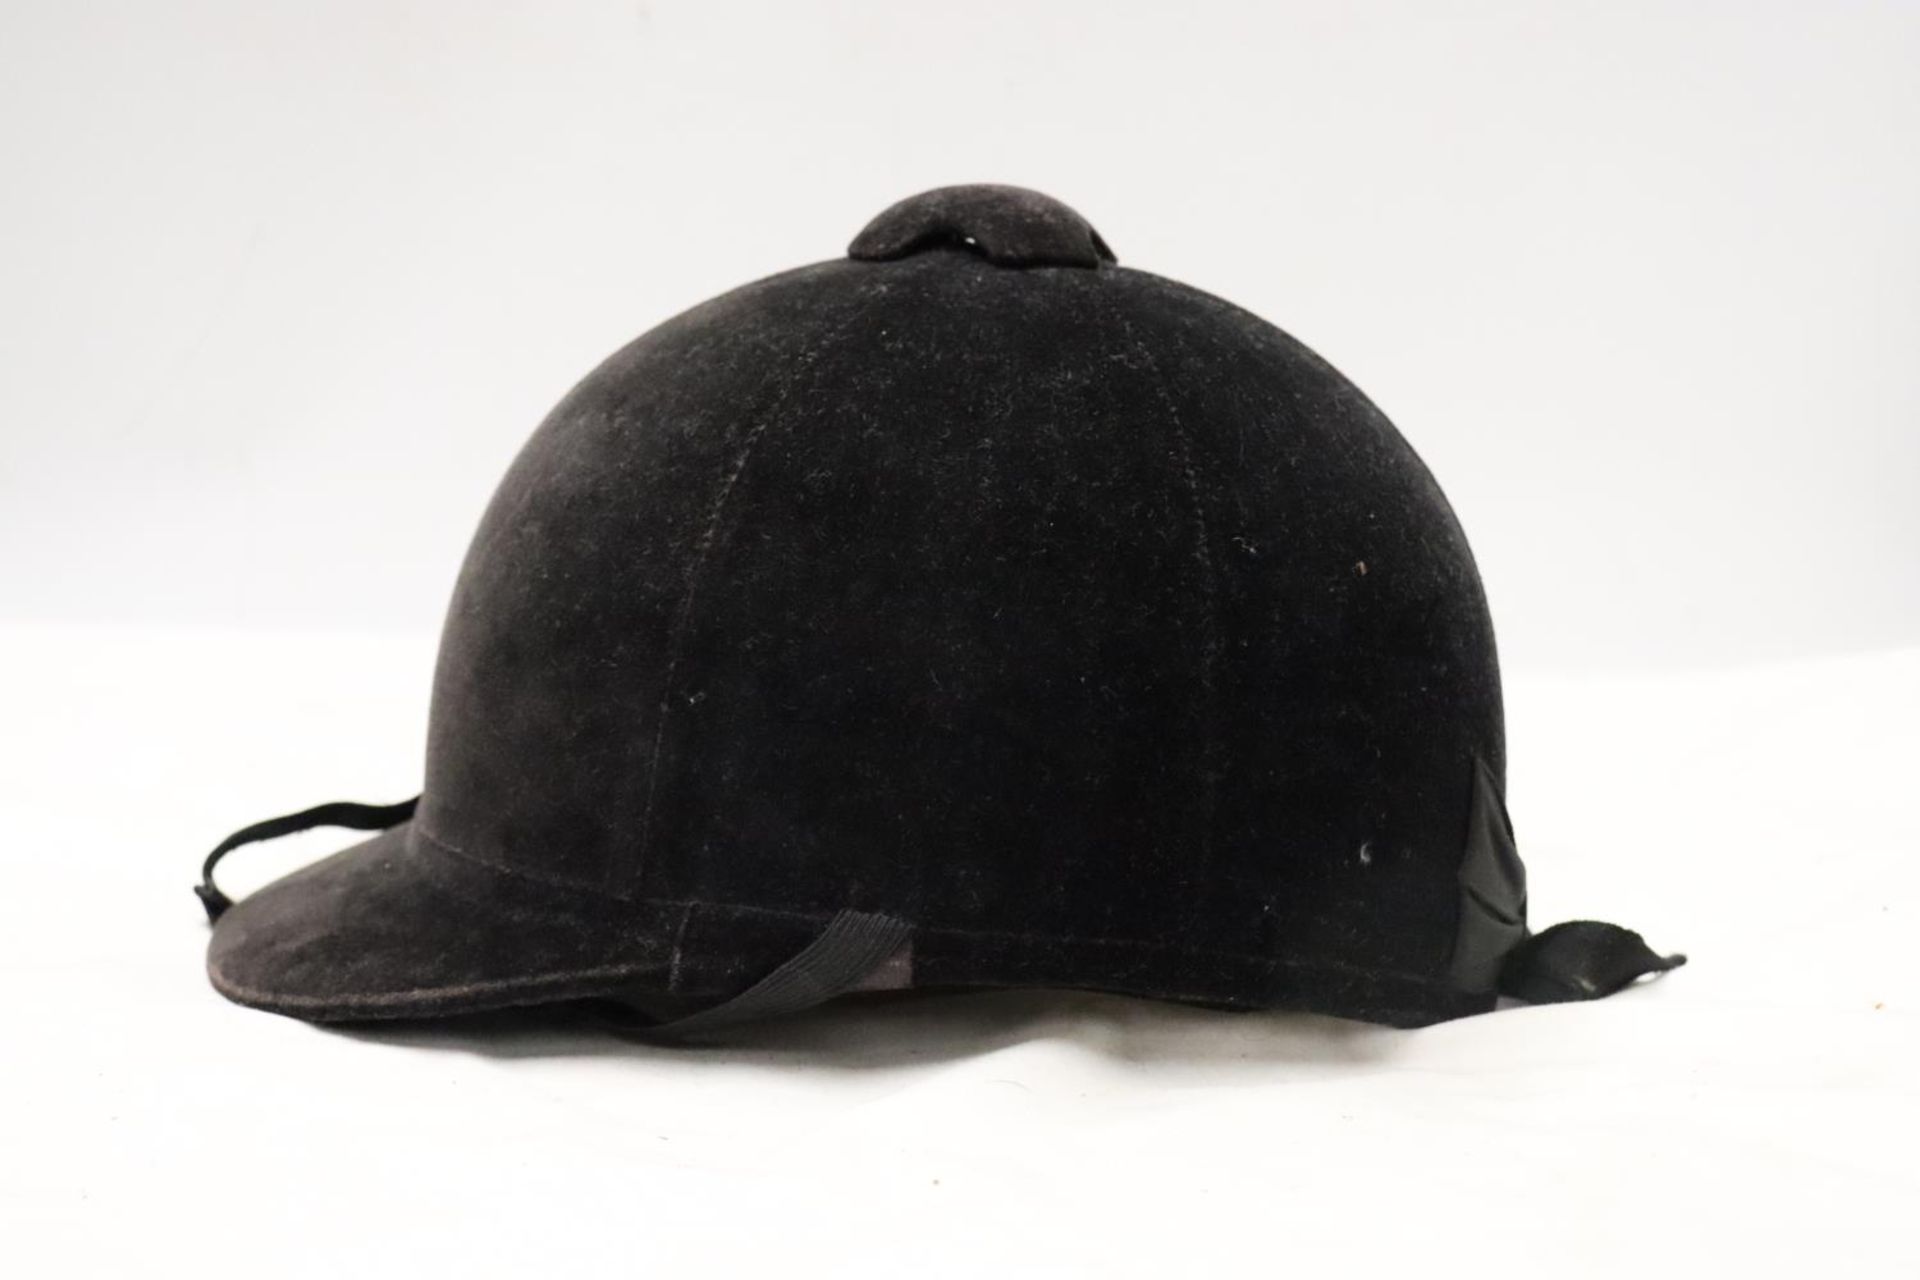 A VINTAGE TRESS & CO LONDON RIDING HAT - SIZE 6 3/4 - Image 3 of 6